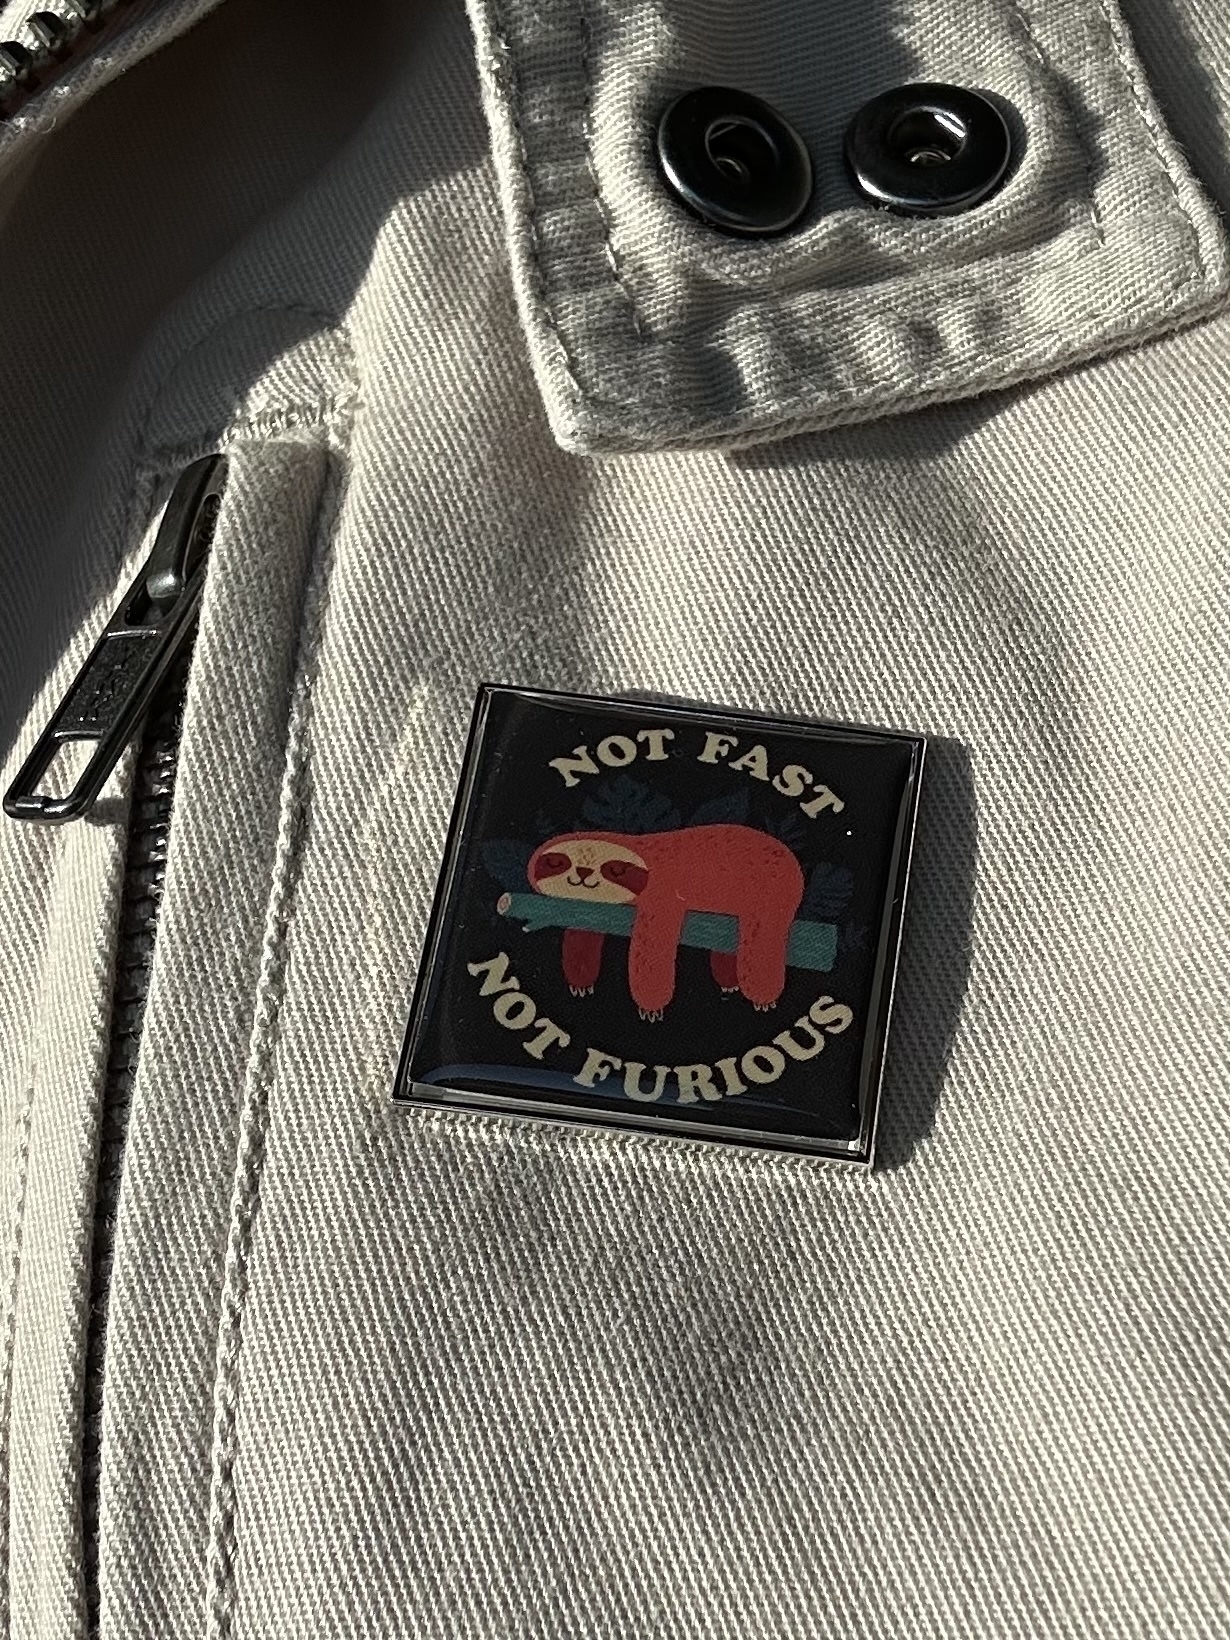 An enamel badge pinned on a cream jacket. The badge is black background, a red sloth draped on a green branch and “not fast” above and then “not furious” below.